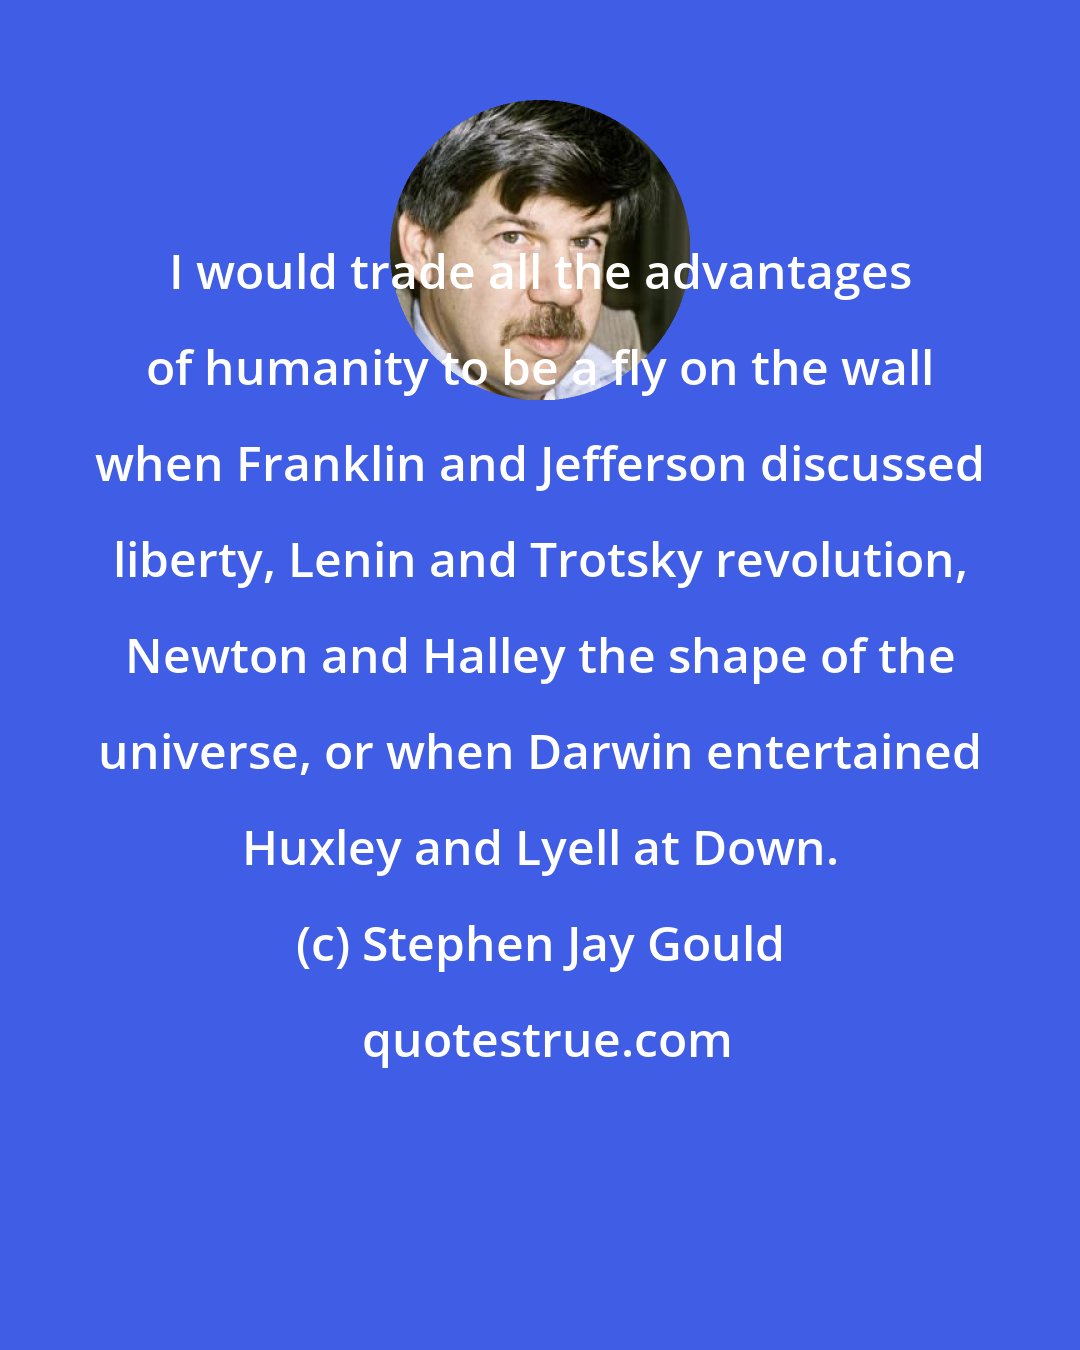 Stephen Jay Gould: I would trade all the advantages of humanity to be a fly on the wall when Franklin and Jefferson discussed liberty, Lenin and Trotsky revolution, Newton and Halley the shape of the universe, or when Darwin entertained Huxley and Lyell at Down.